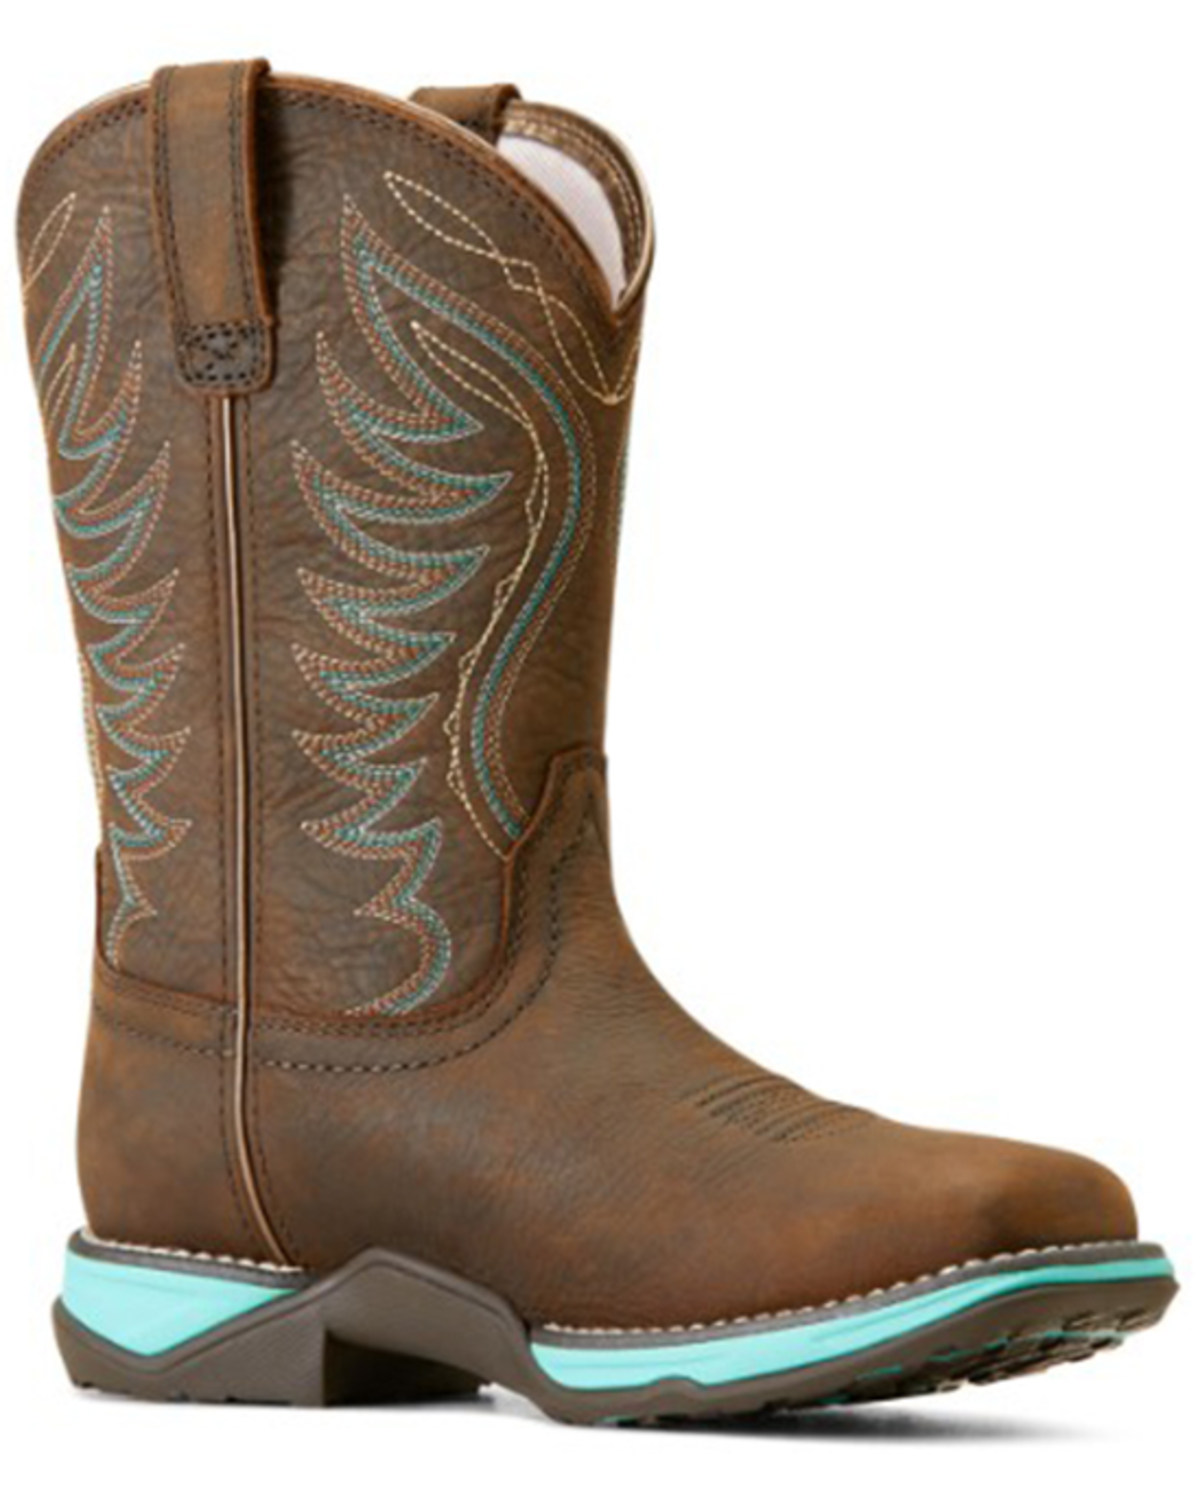 Ariat Women's Anthem Waterproof Western Boots - Broad Square Toe